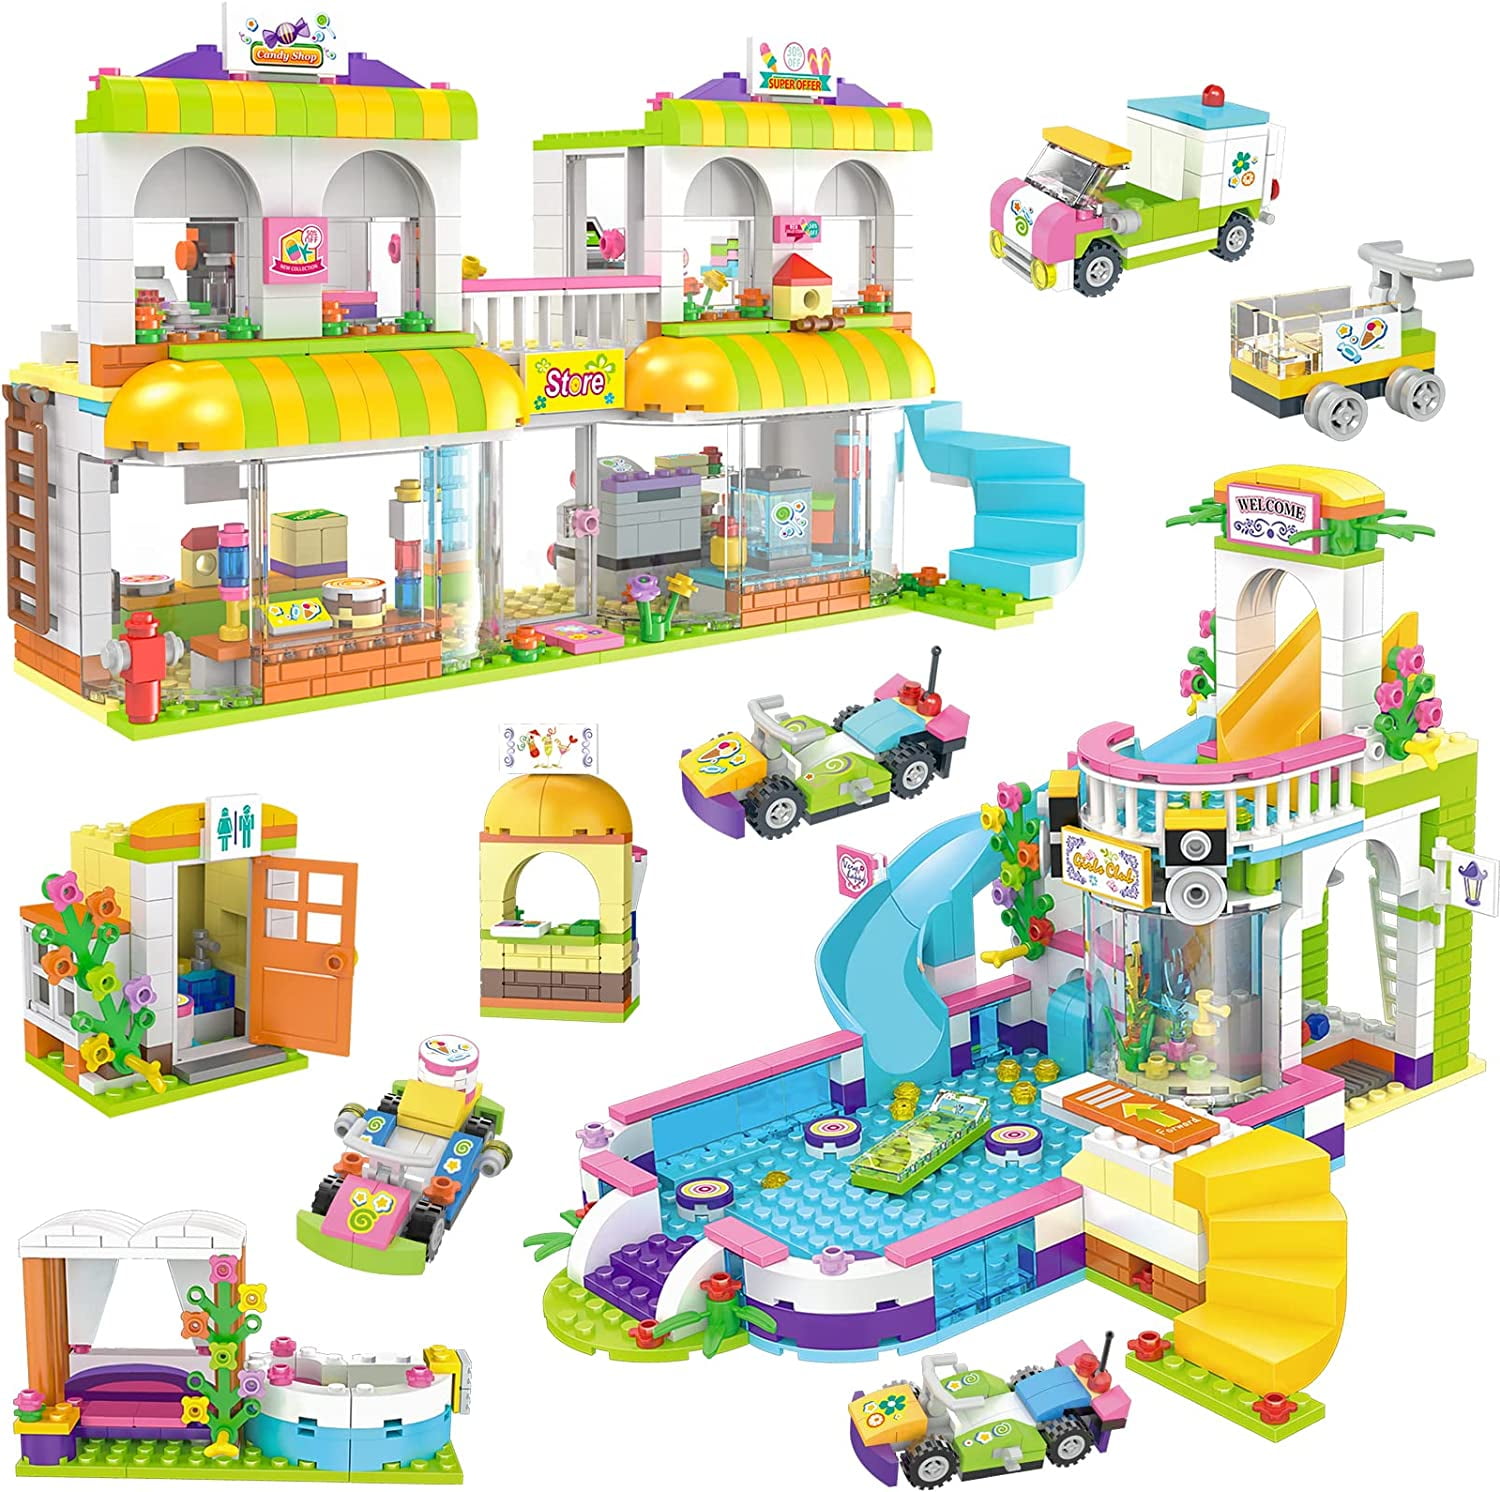 EP EXERCISE PLAY Friends Summer Pool Party City Supermarket Building Blocks Set, and Roleplay STEM Toys Gift for Boys Girls 6-12 (1375 Pieces) - Walmart.com